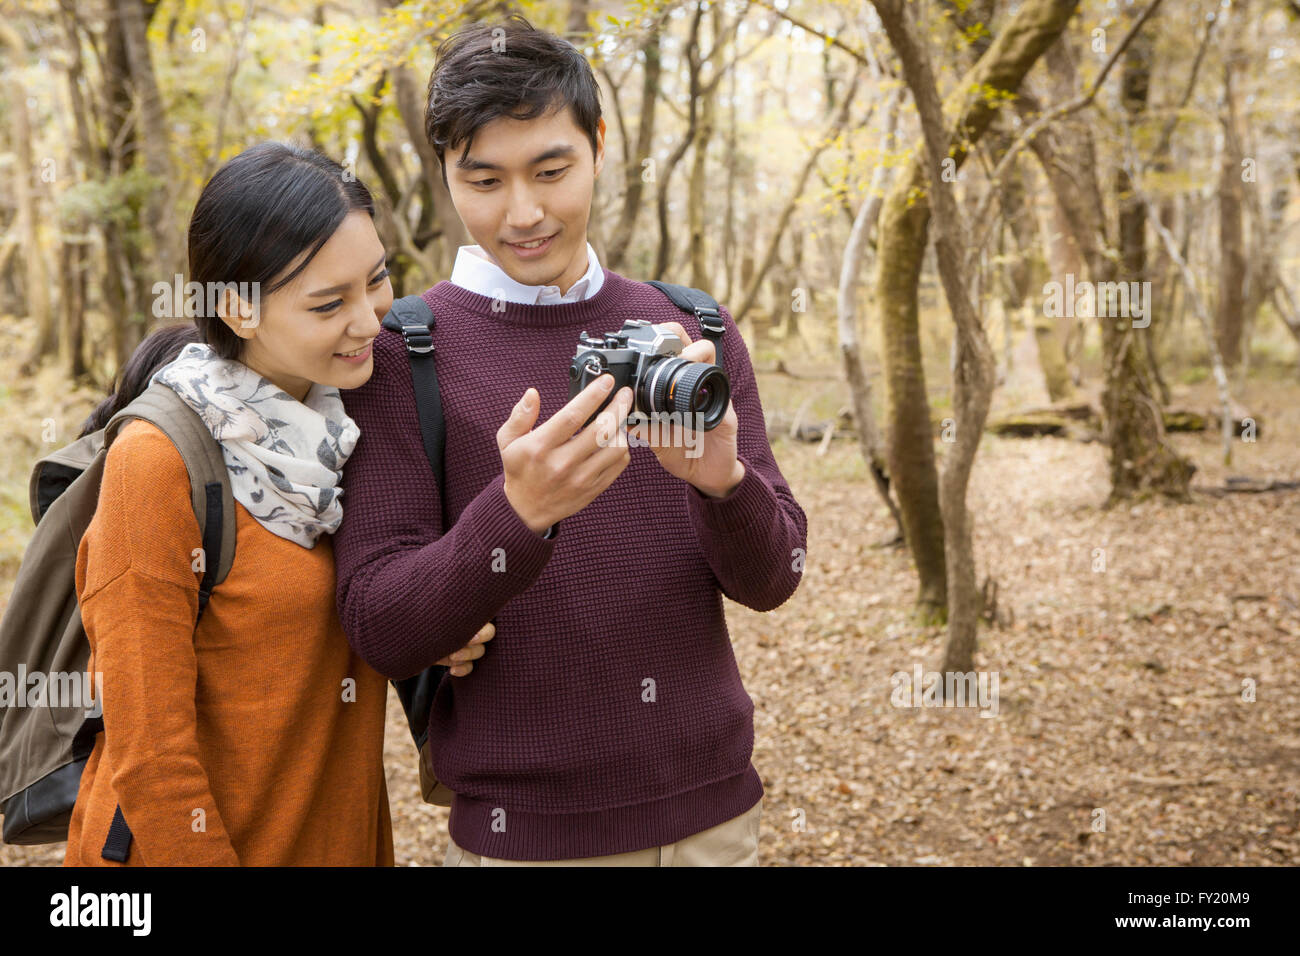 Couple in backpack looking at a camera held by the man at the forest in fall Stock Photo